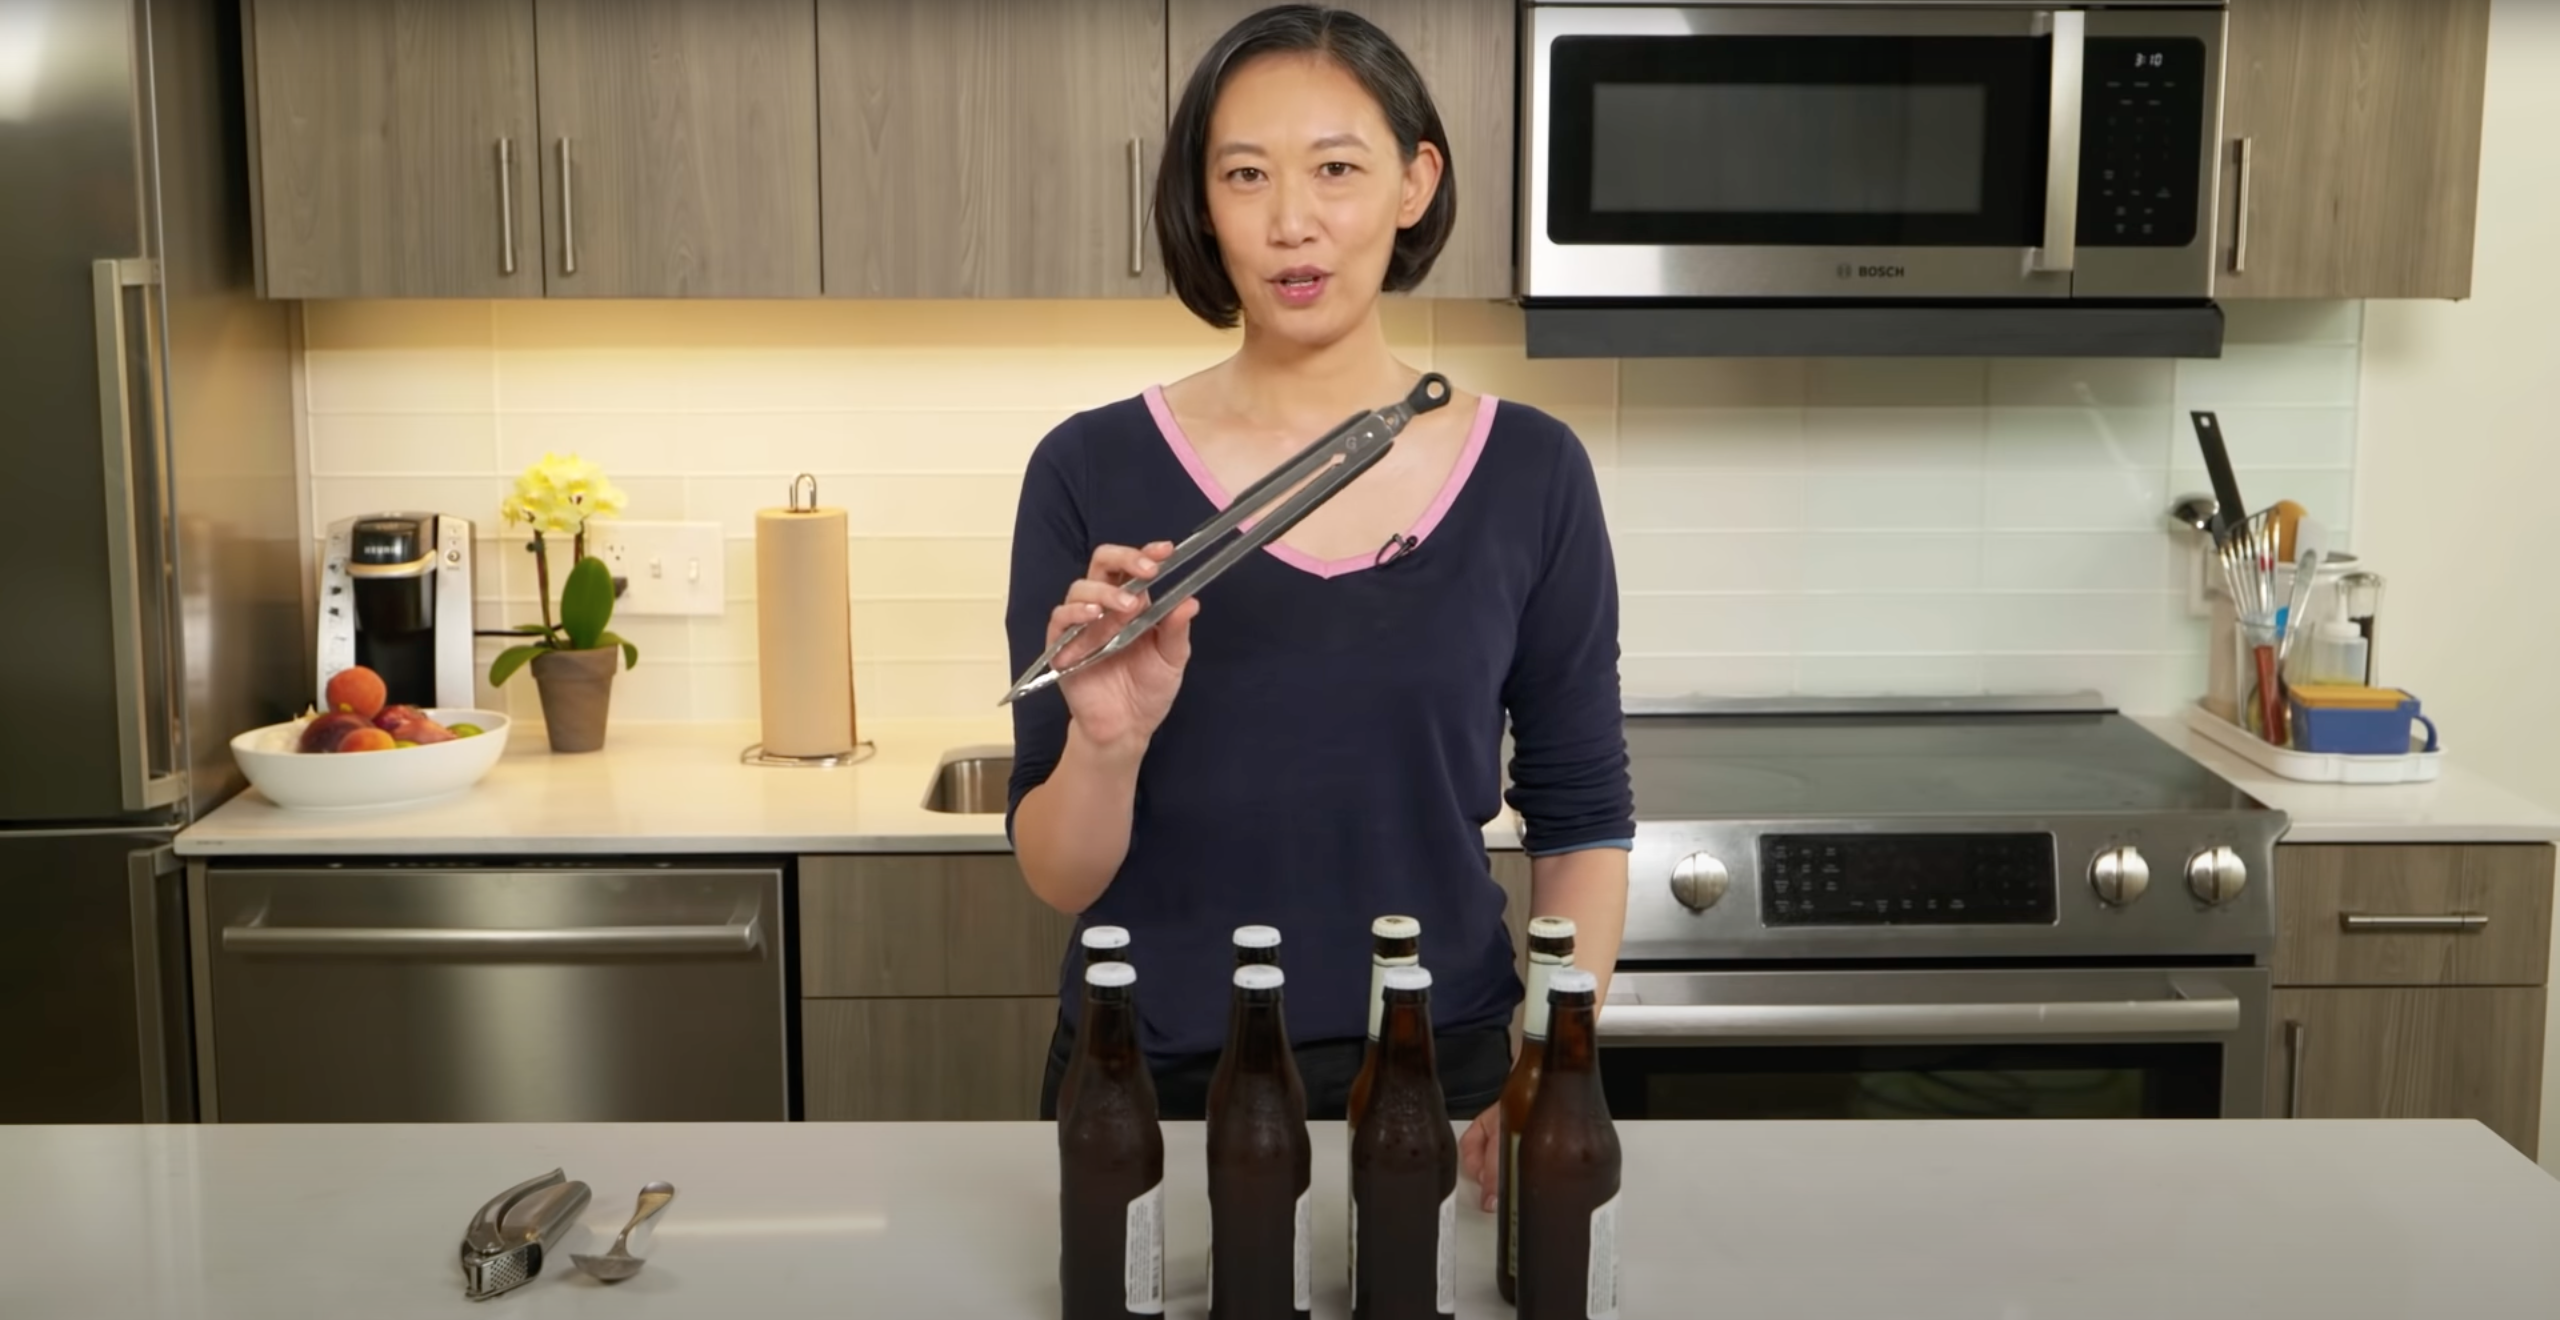 How To Open A Beer Bottle With Pretty Much Anything Except An Opener